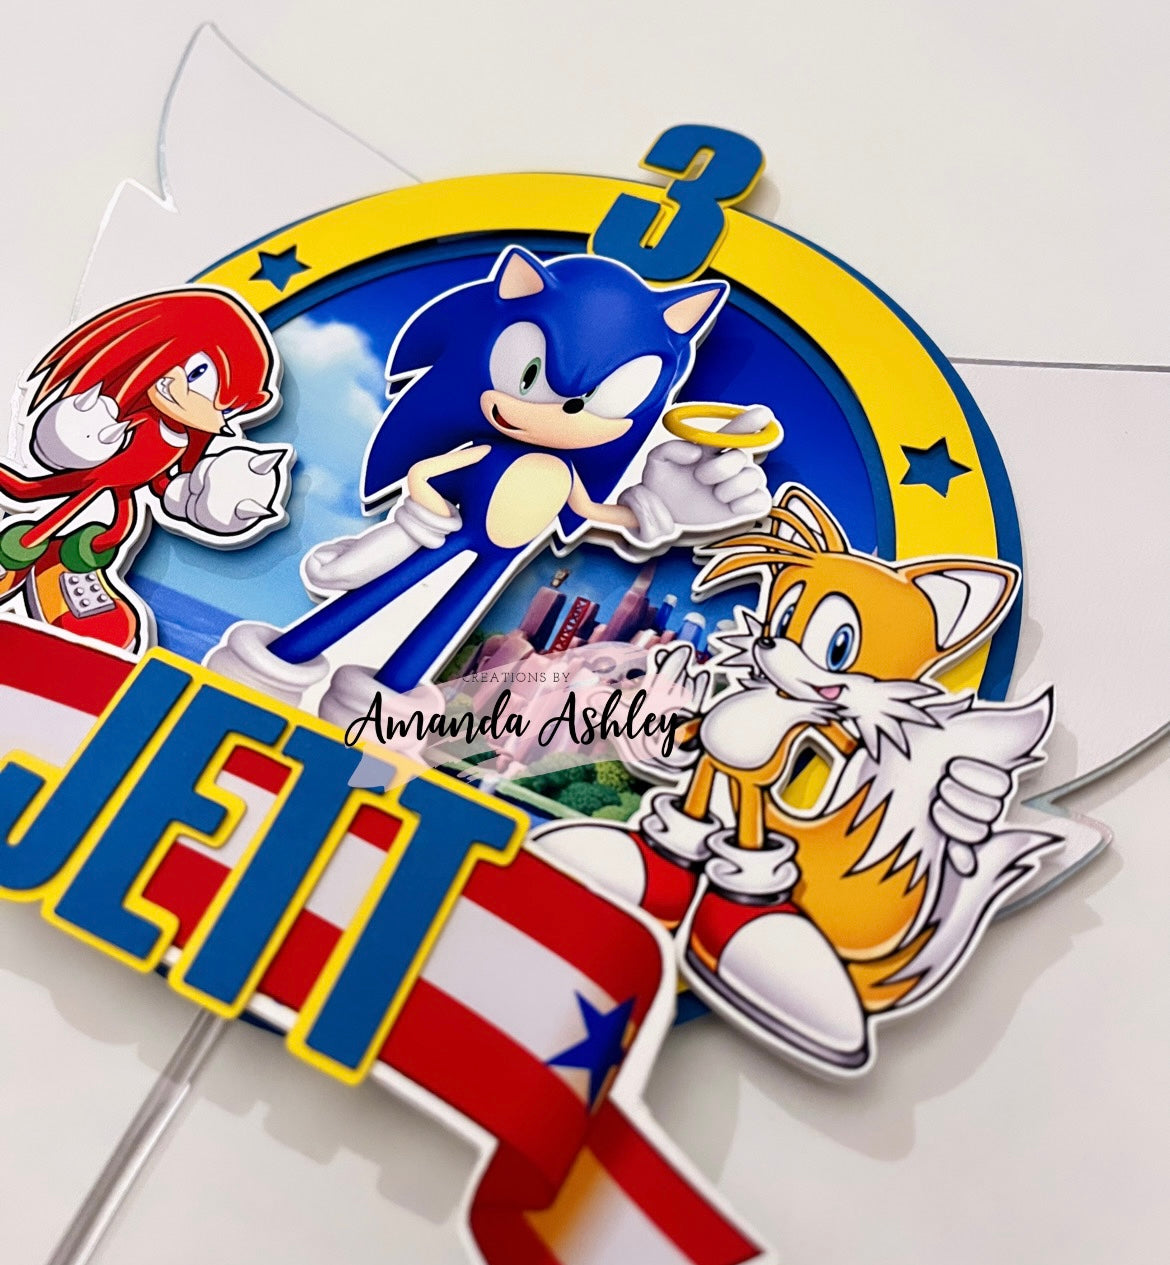 Sonic The Hedgehog Cake Toppers